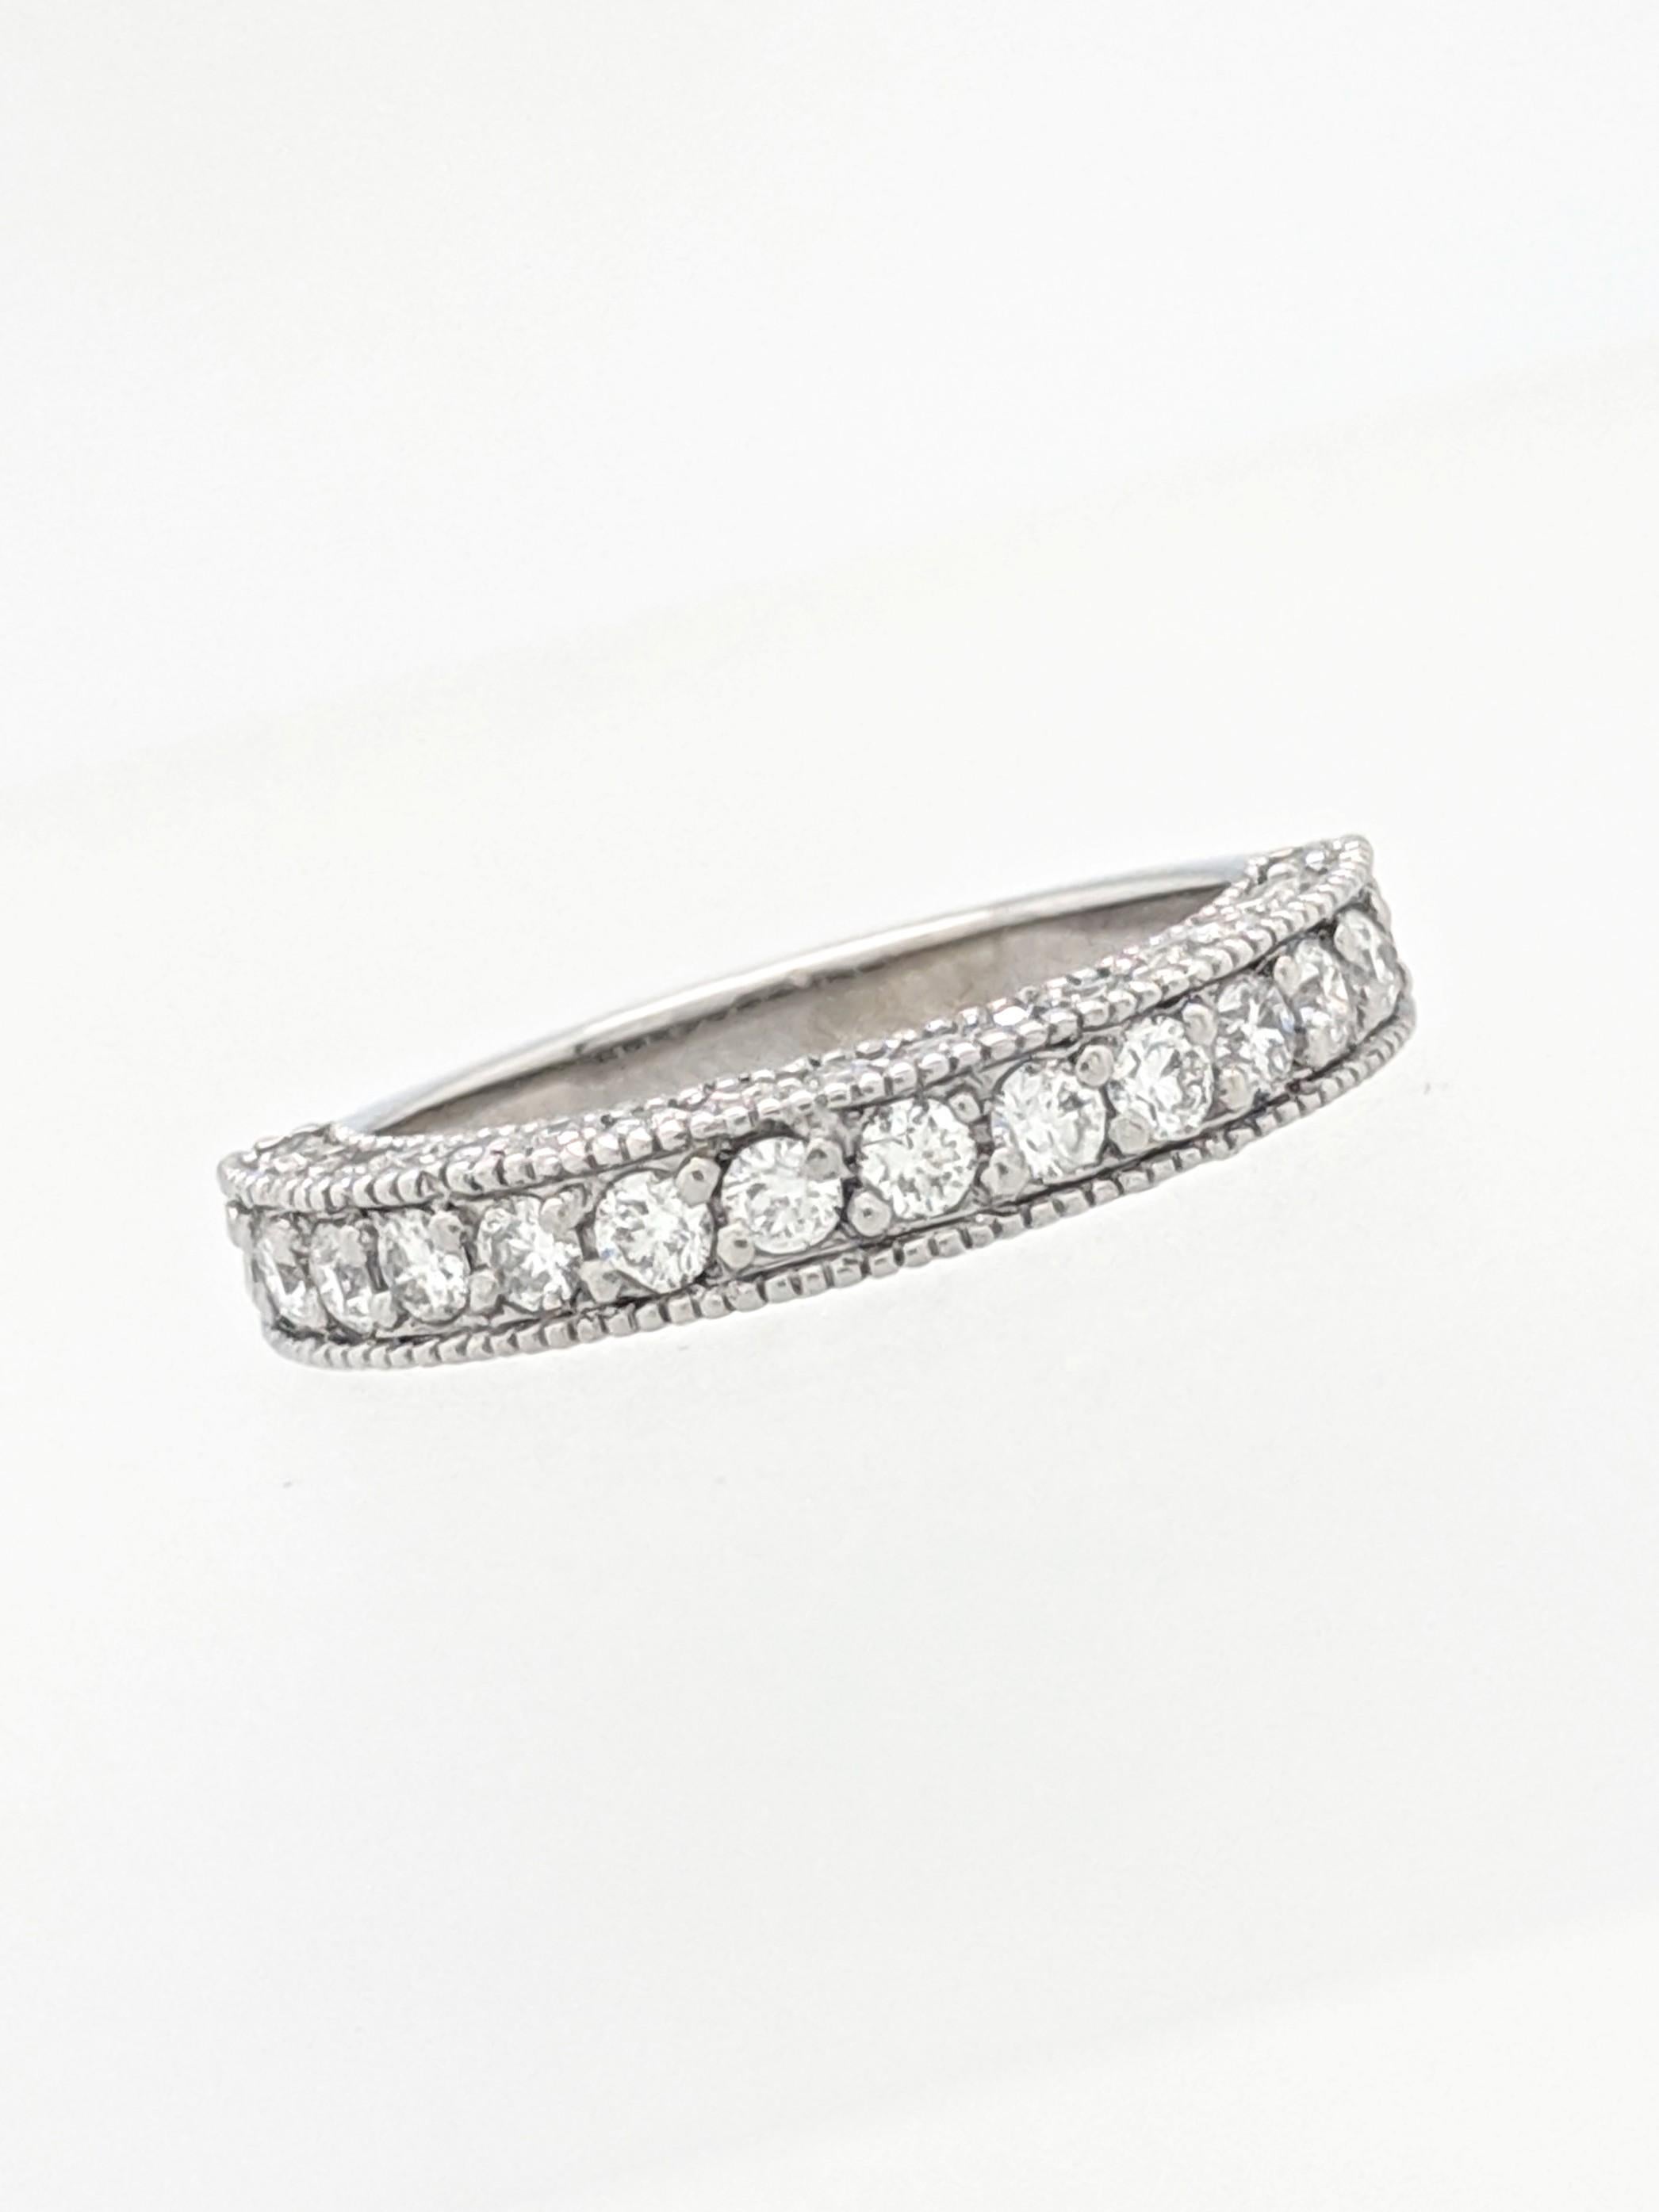 Contemporary 14 Karat White Gold 1 Carat Diamond Stackable Anniversary Wedding Band For Sale